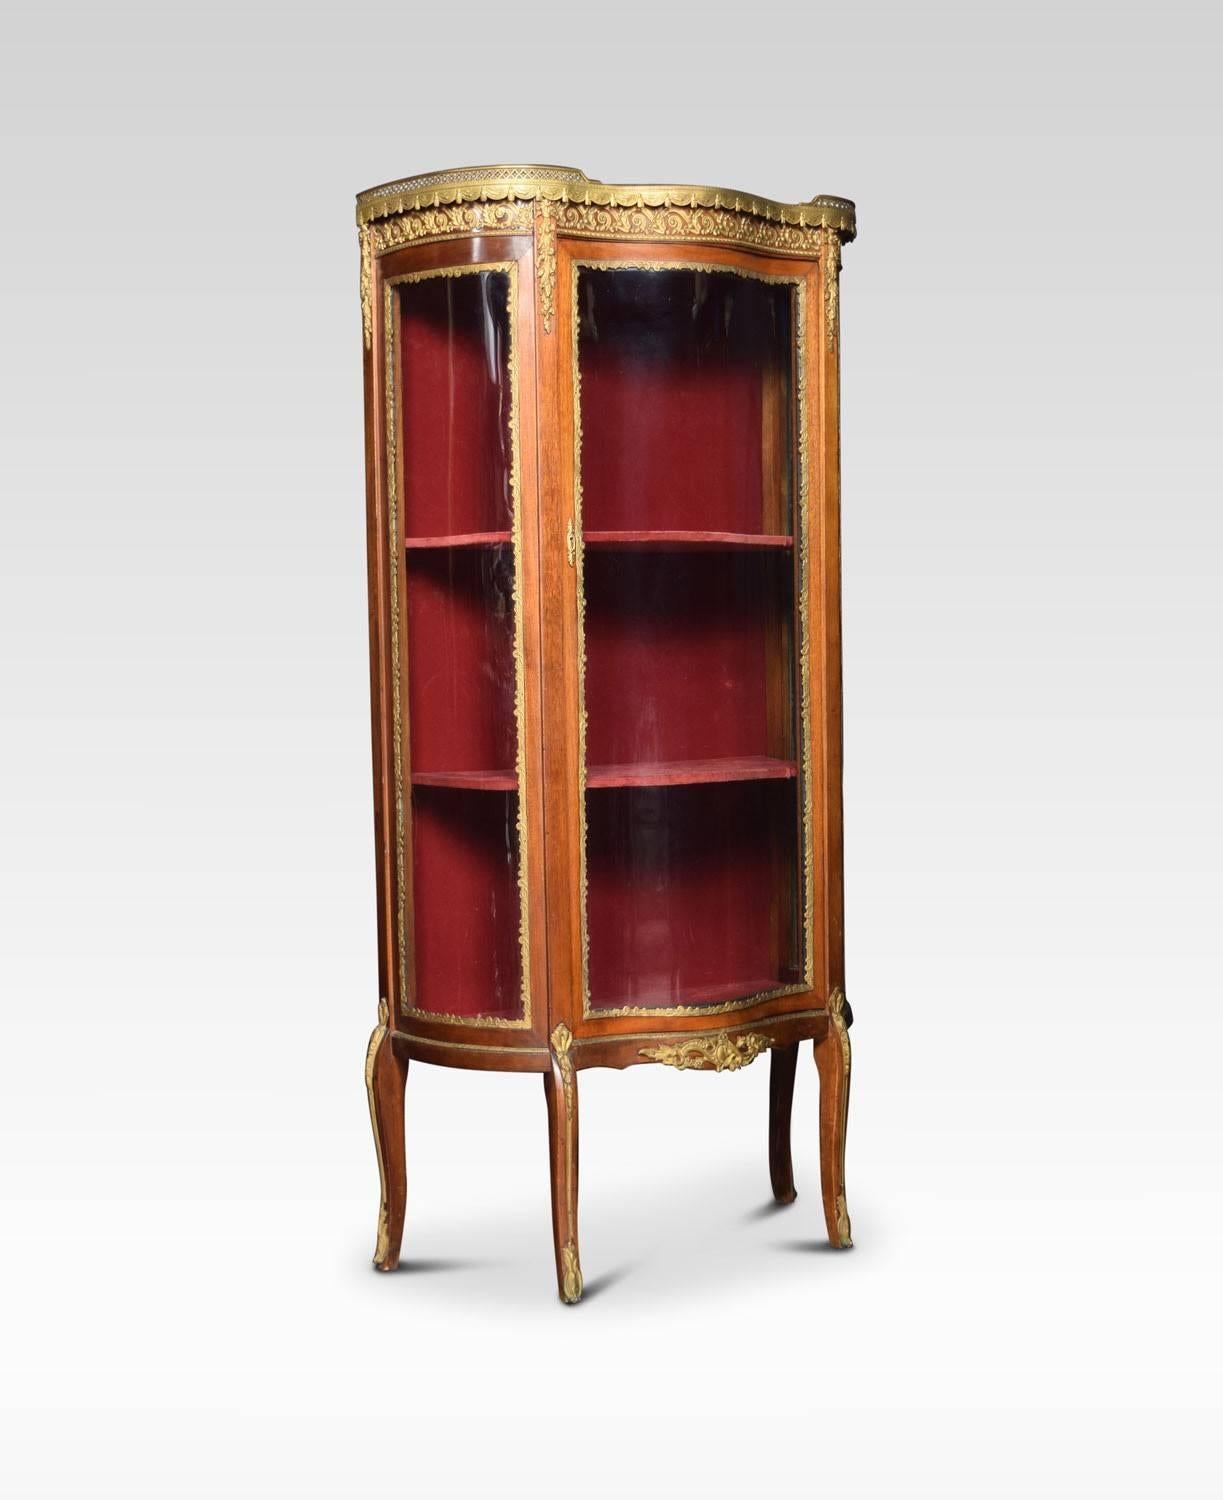 Mahogany display cabinet, the shaped marble top with raised three quarter ormolu gallery, above glass sides and serpentine fronted door enclosing upholstered interior with two fixed shelves. All raised on elegant curved legs with ormolu